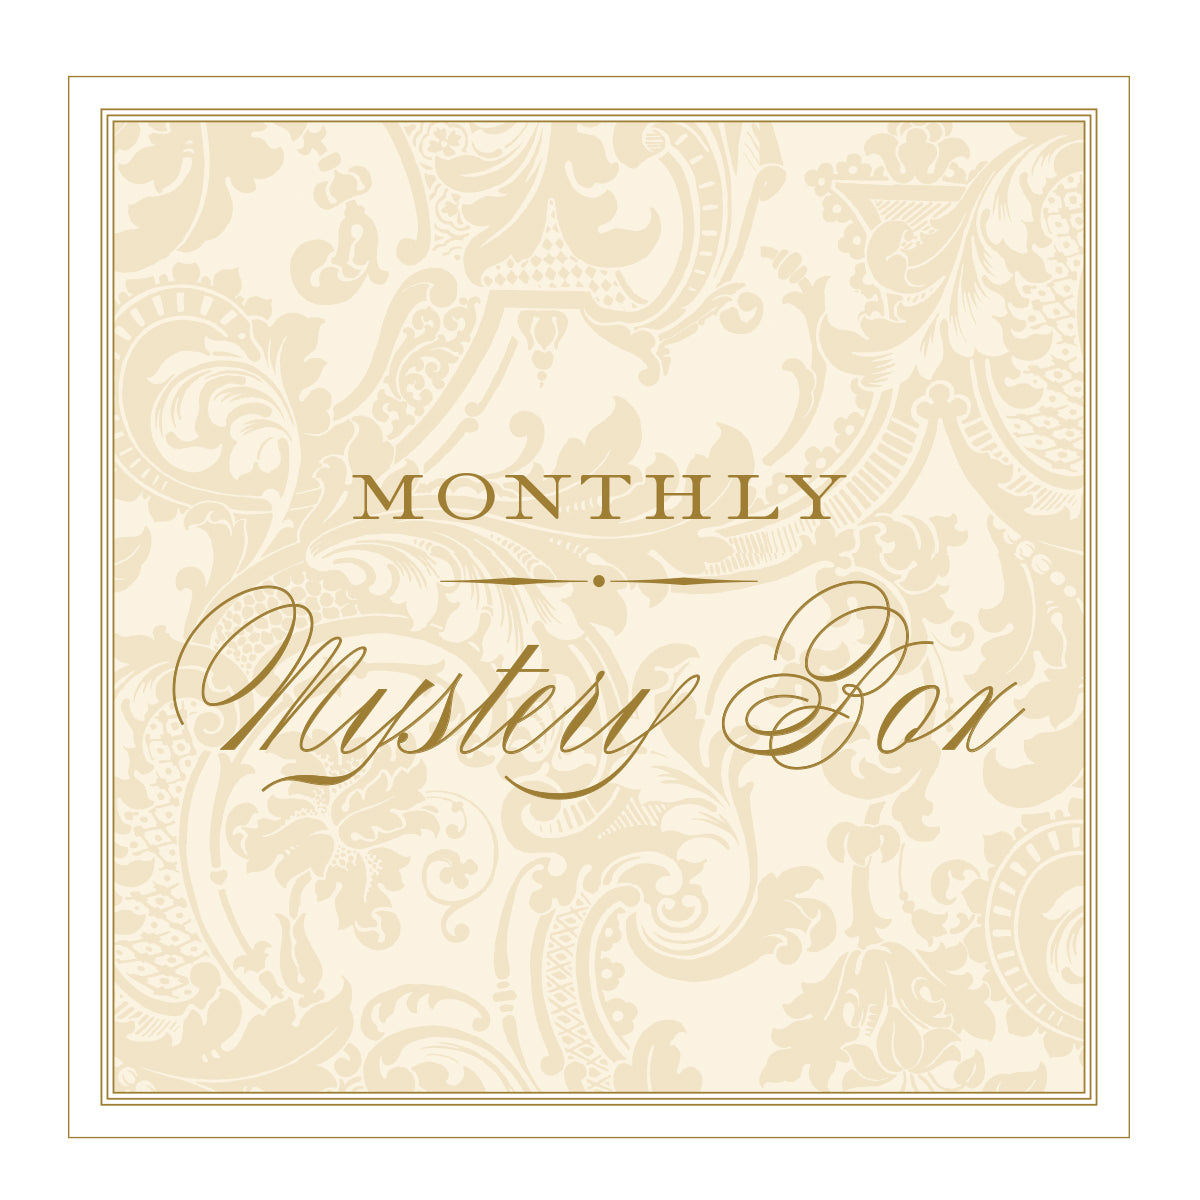 An ornate beige and gold label with the words "Monthly Mystery Box" in elegant script font, featuring exclusive Anna Griffin products.